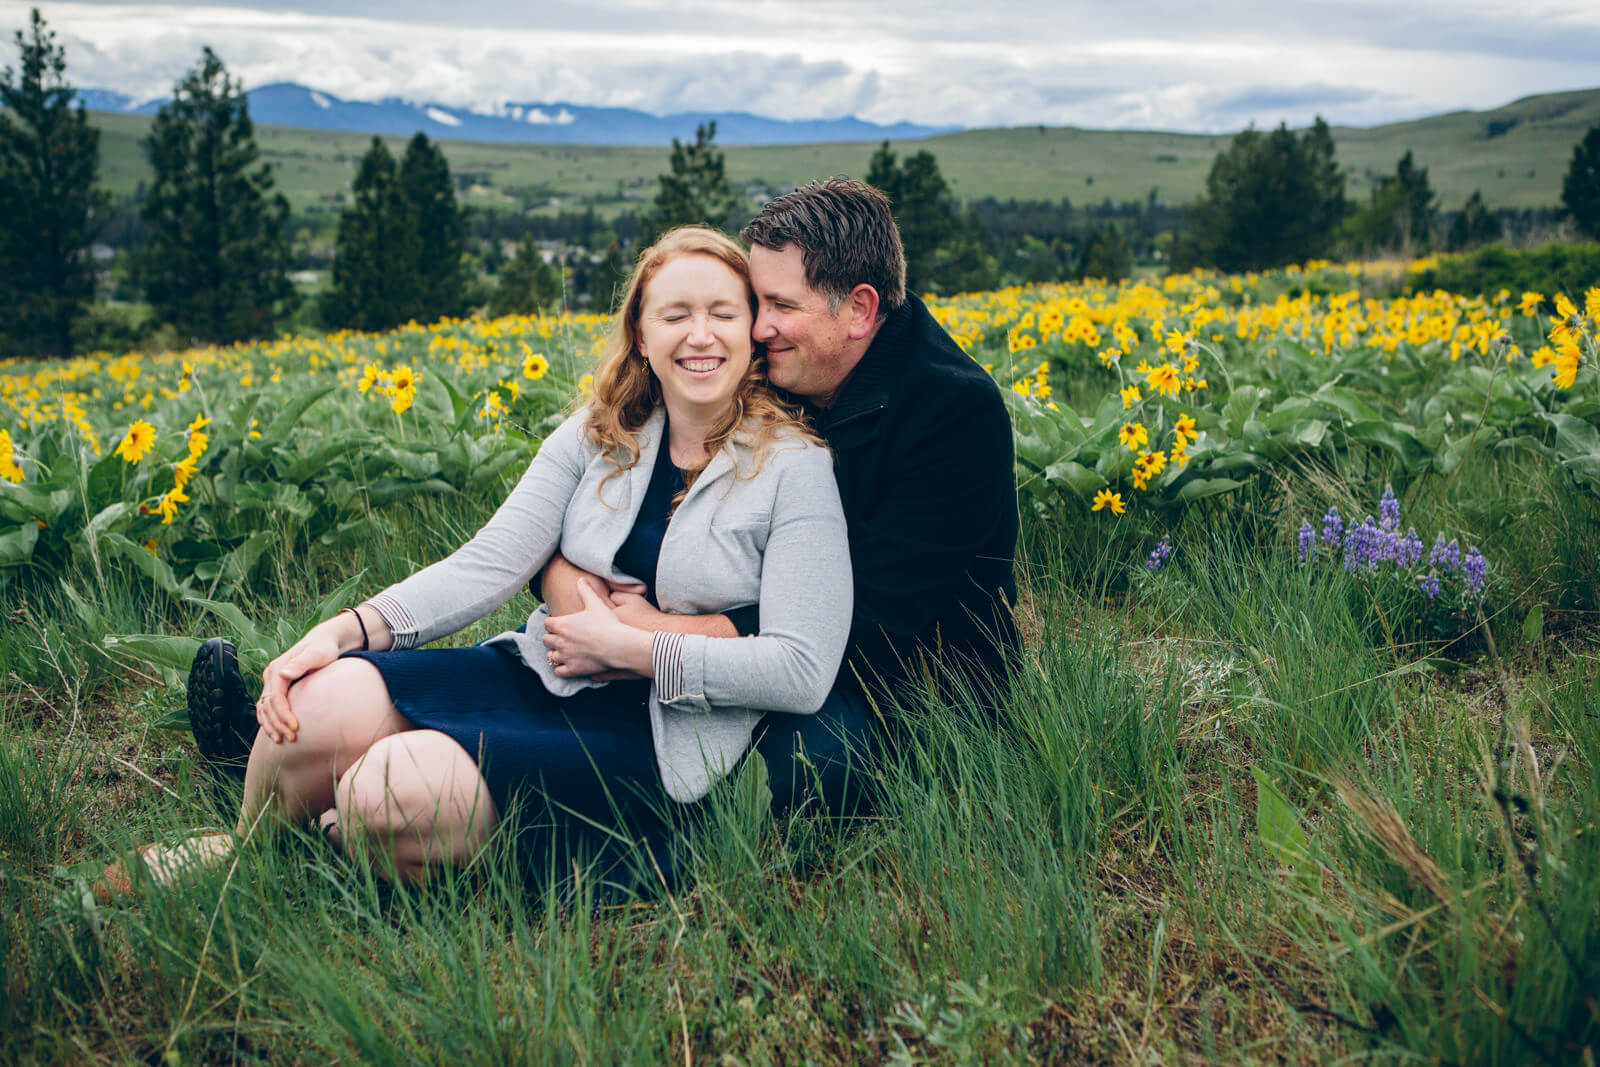 An engaged couple embraces and laughs amidst a field of arrow leaf balsam root wildflowers during their spring engagement session in Missoula Montana